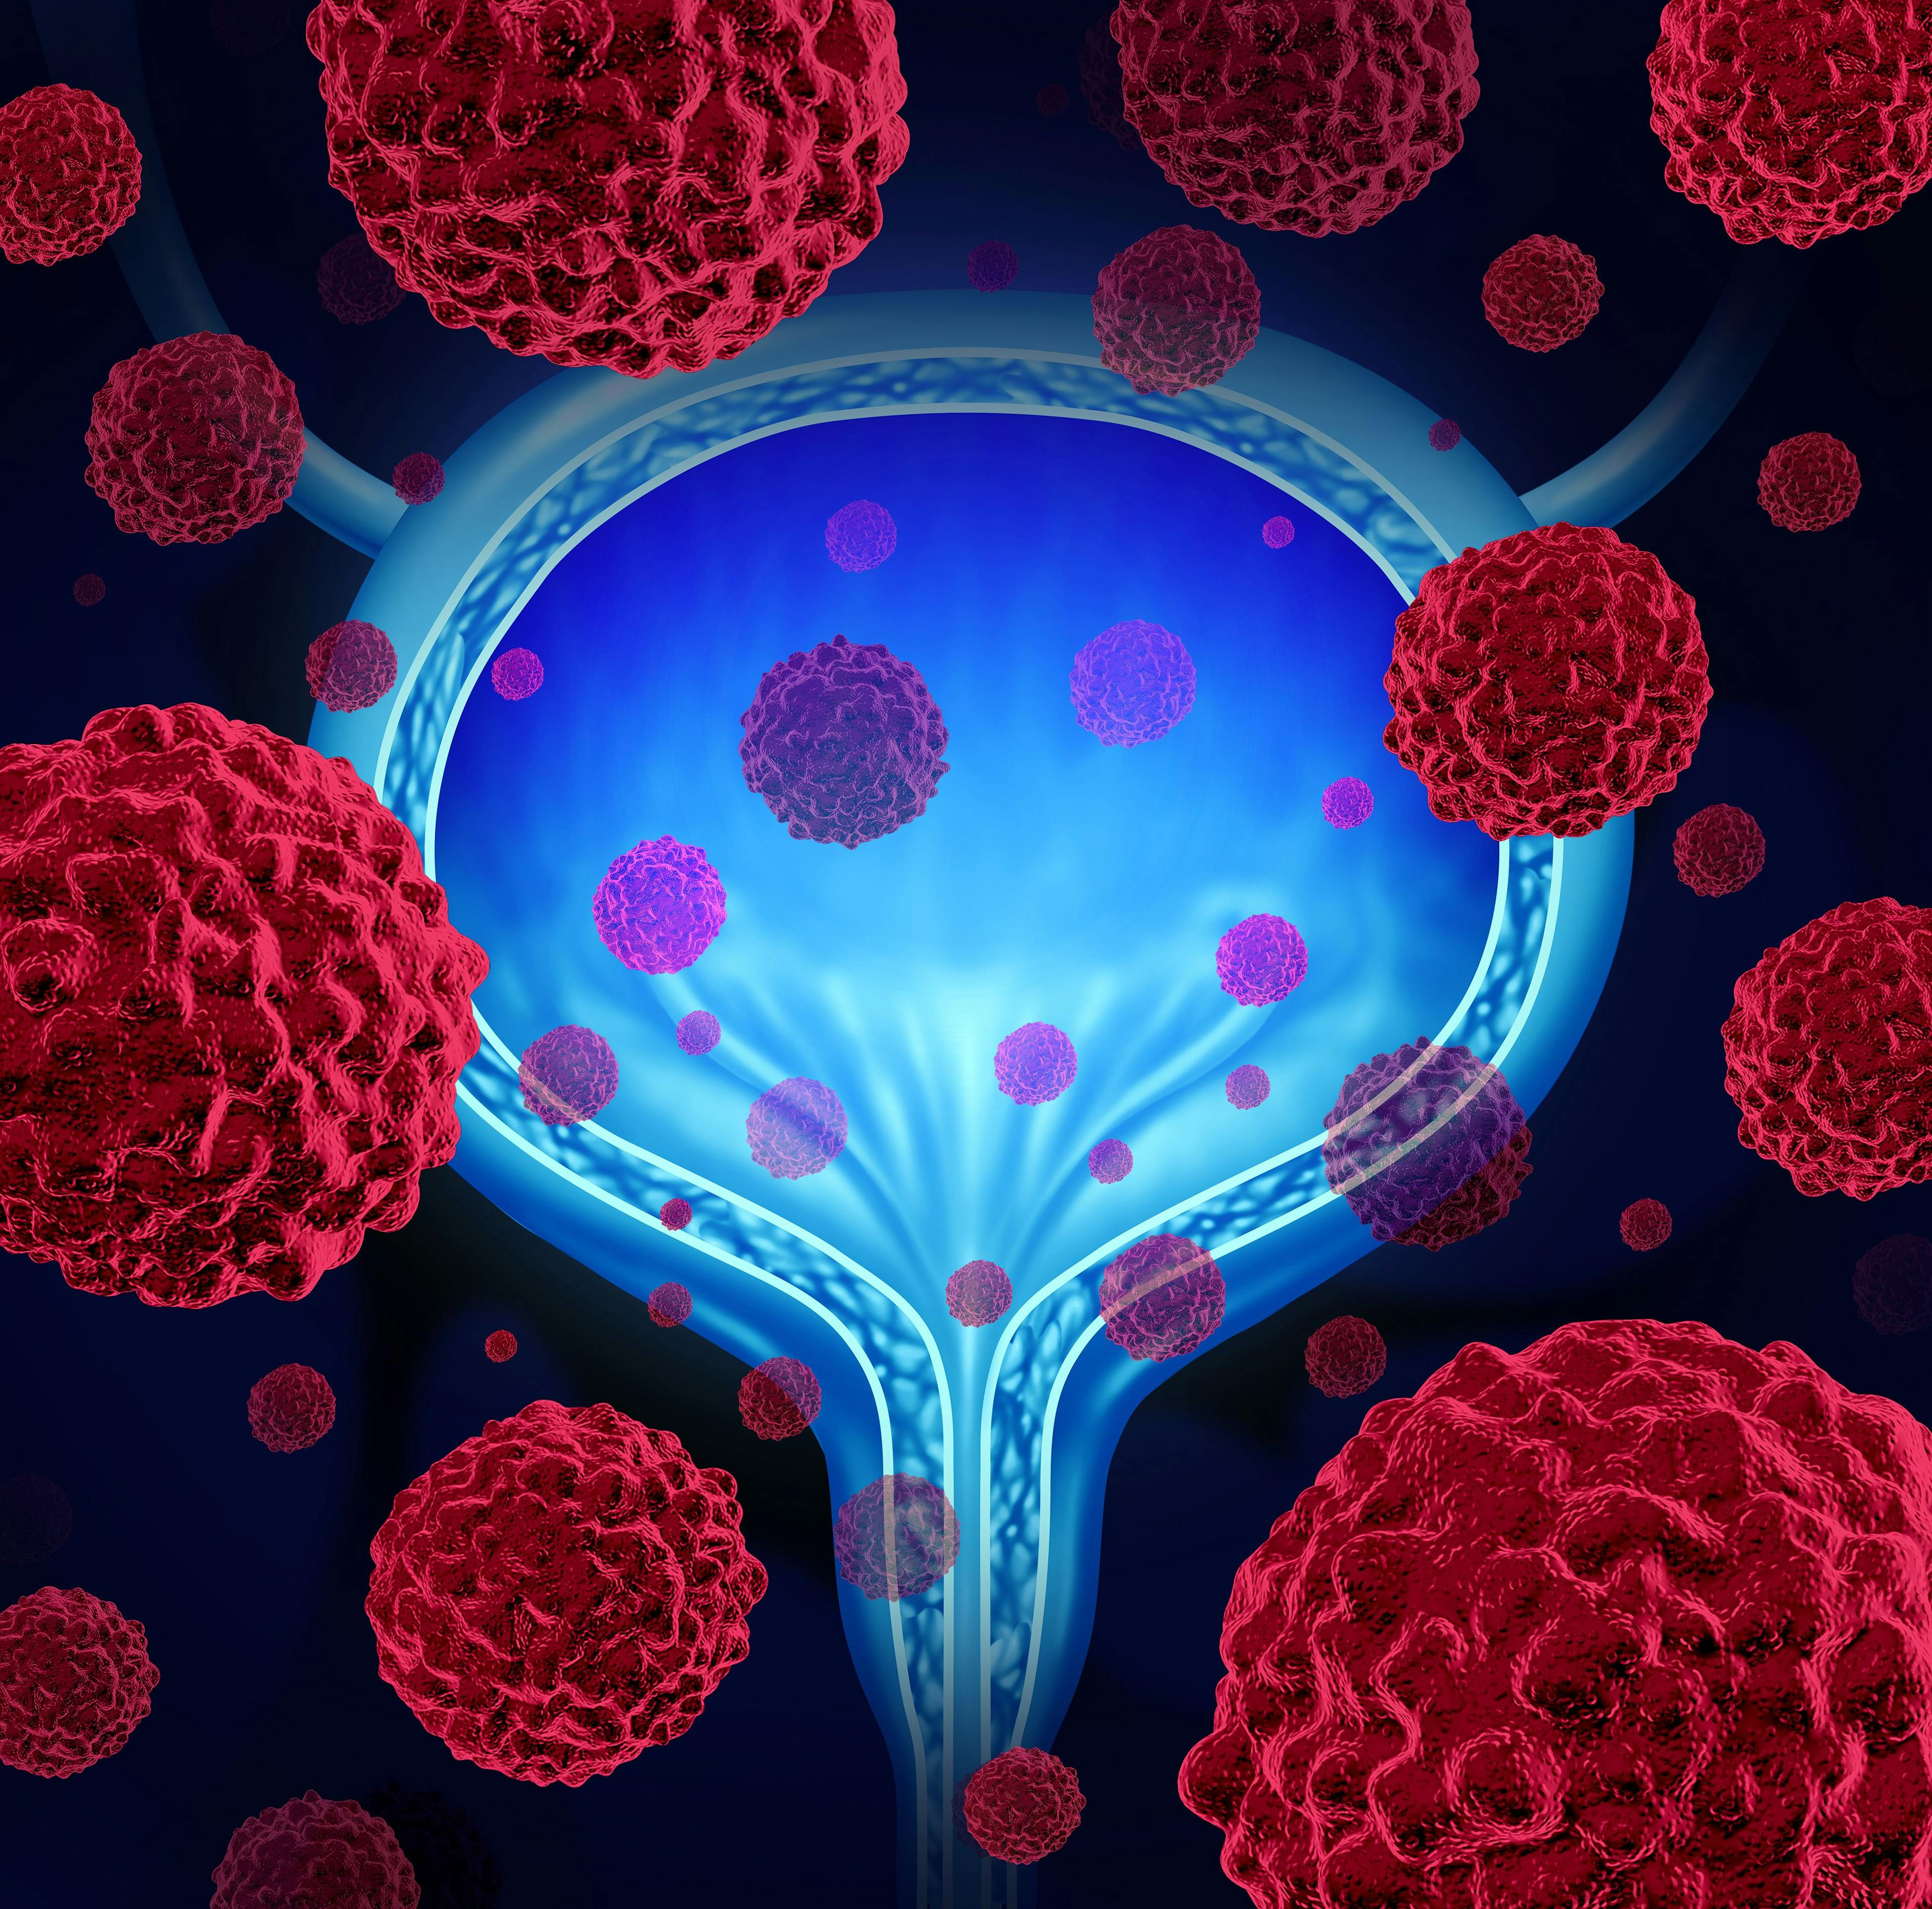 Nivolumab Granted Priority Review as Adjuvant Therapy for Muscle-Invasive Urothelial Carcinoma